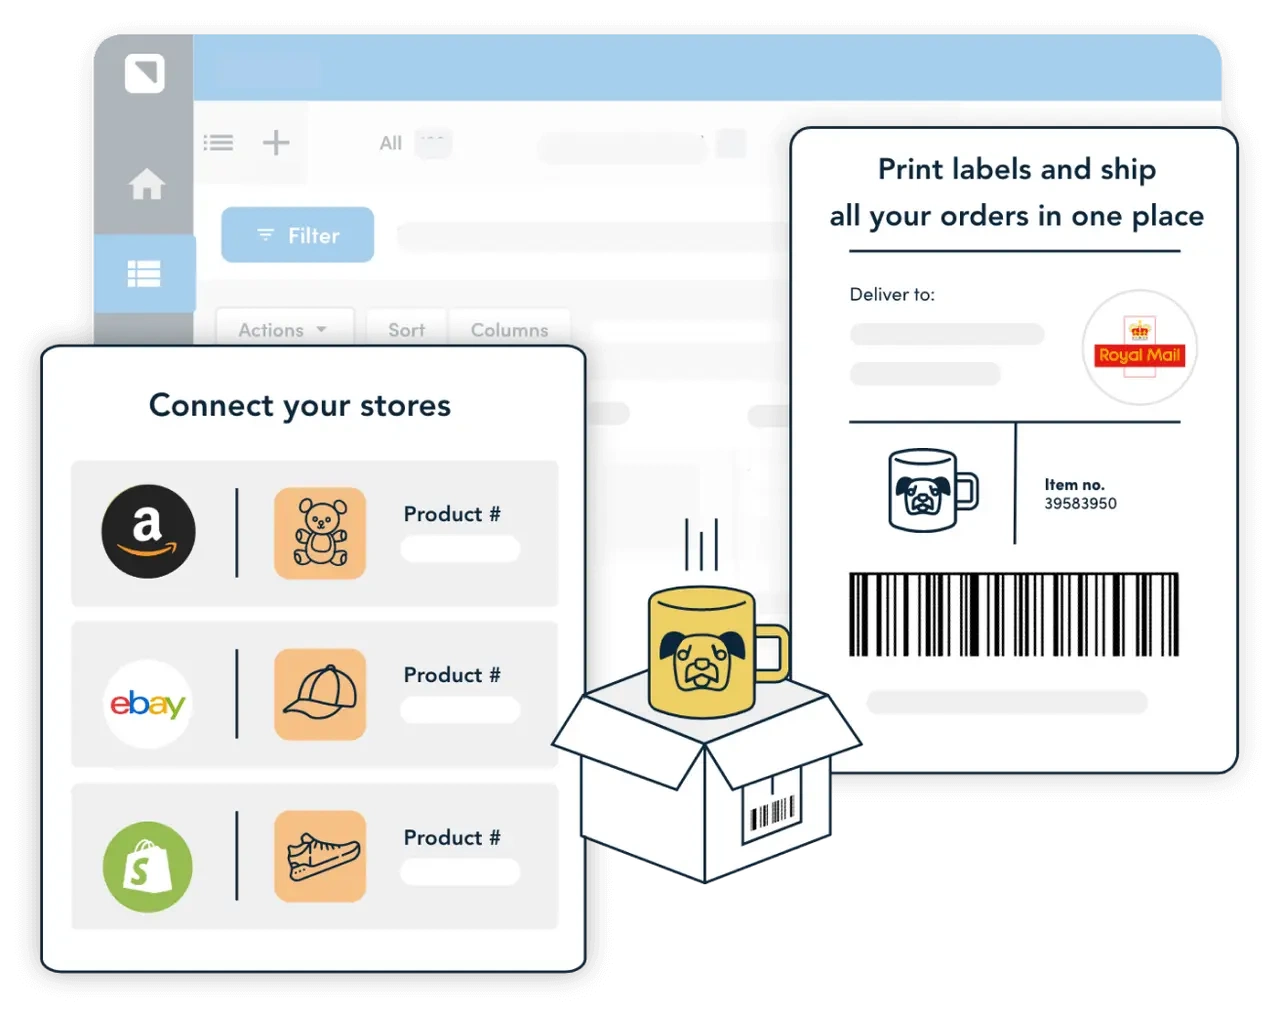 Connect your stores, print labels and ship all your orders in one place.